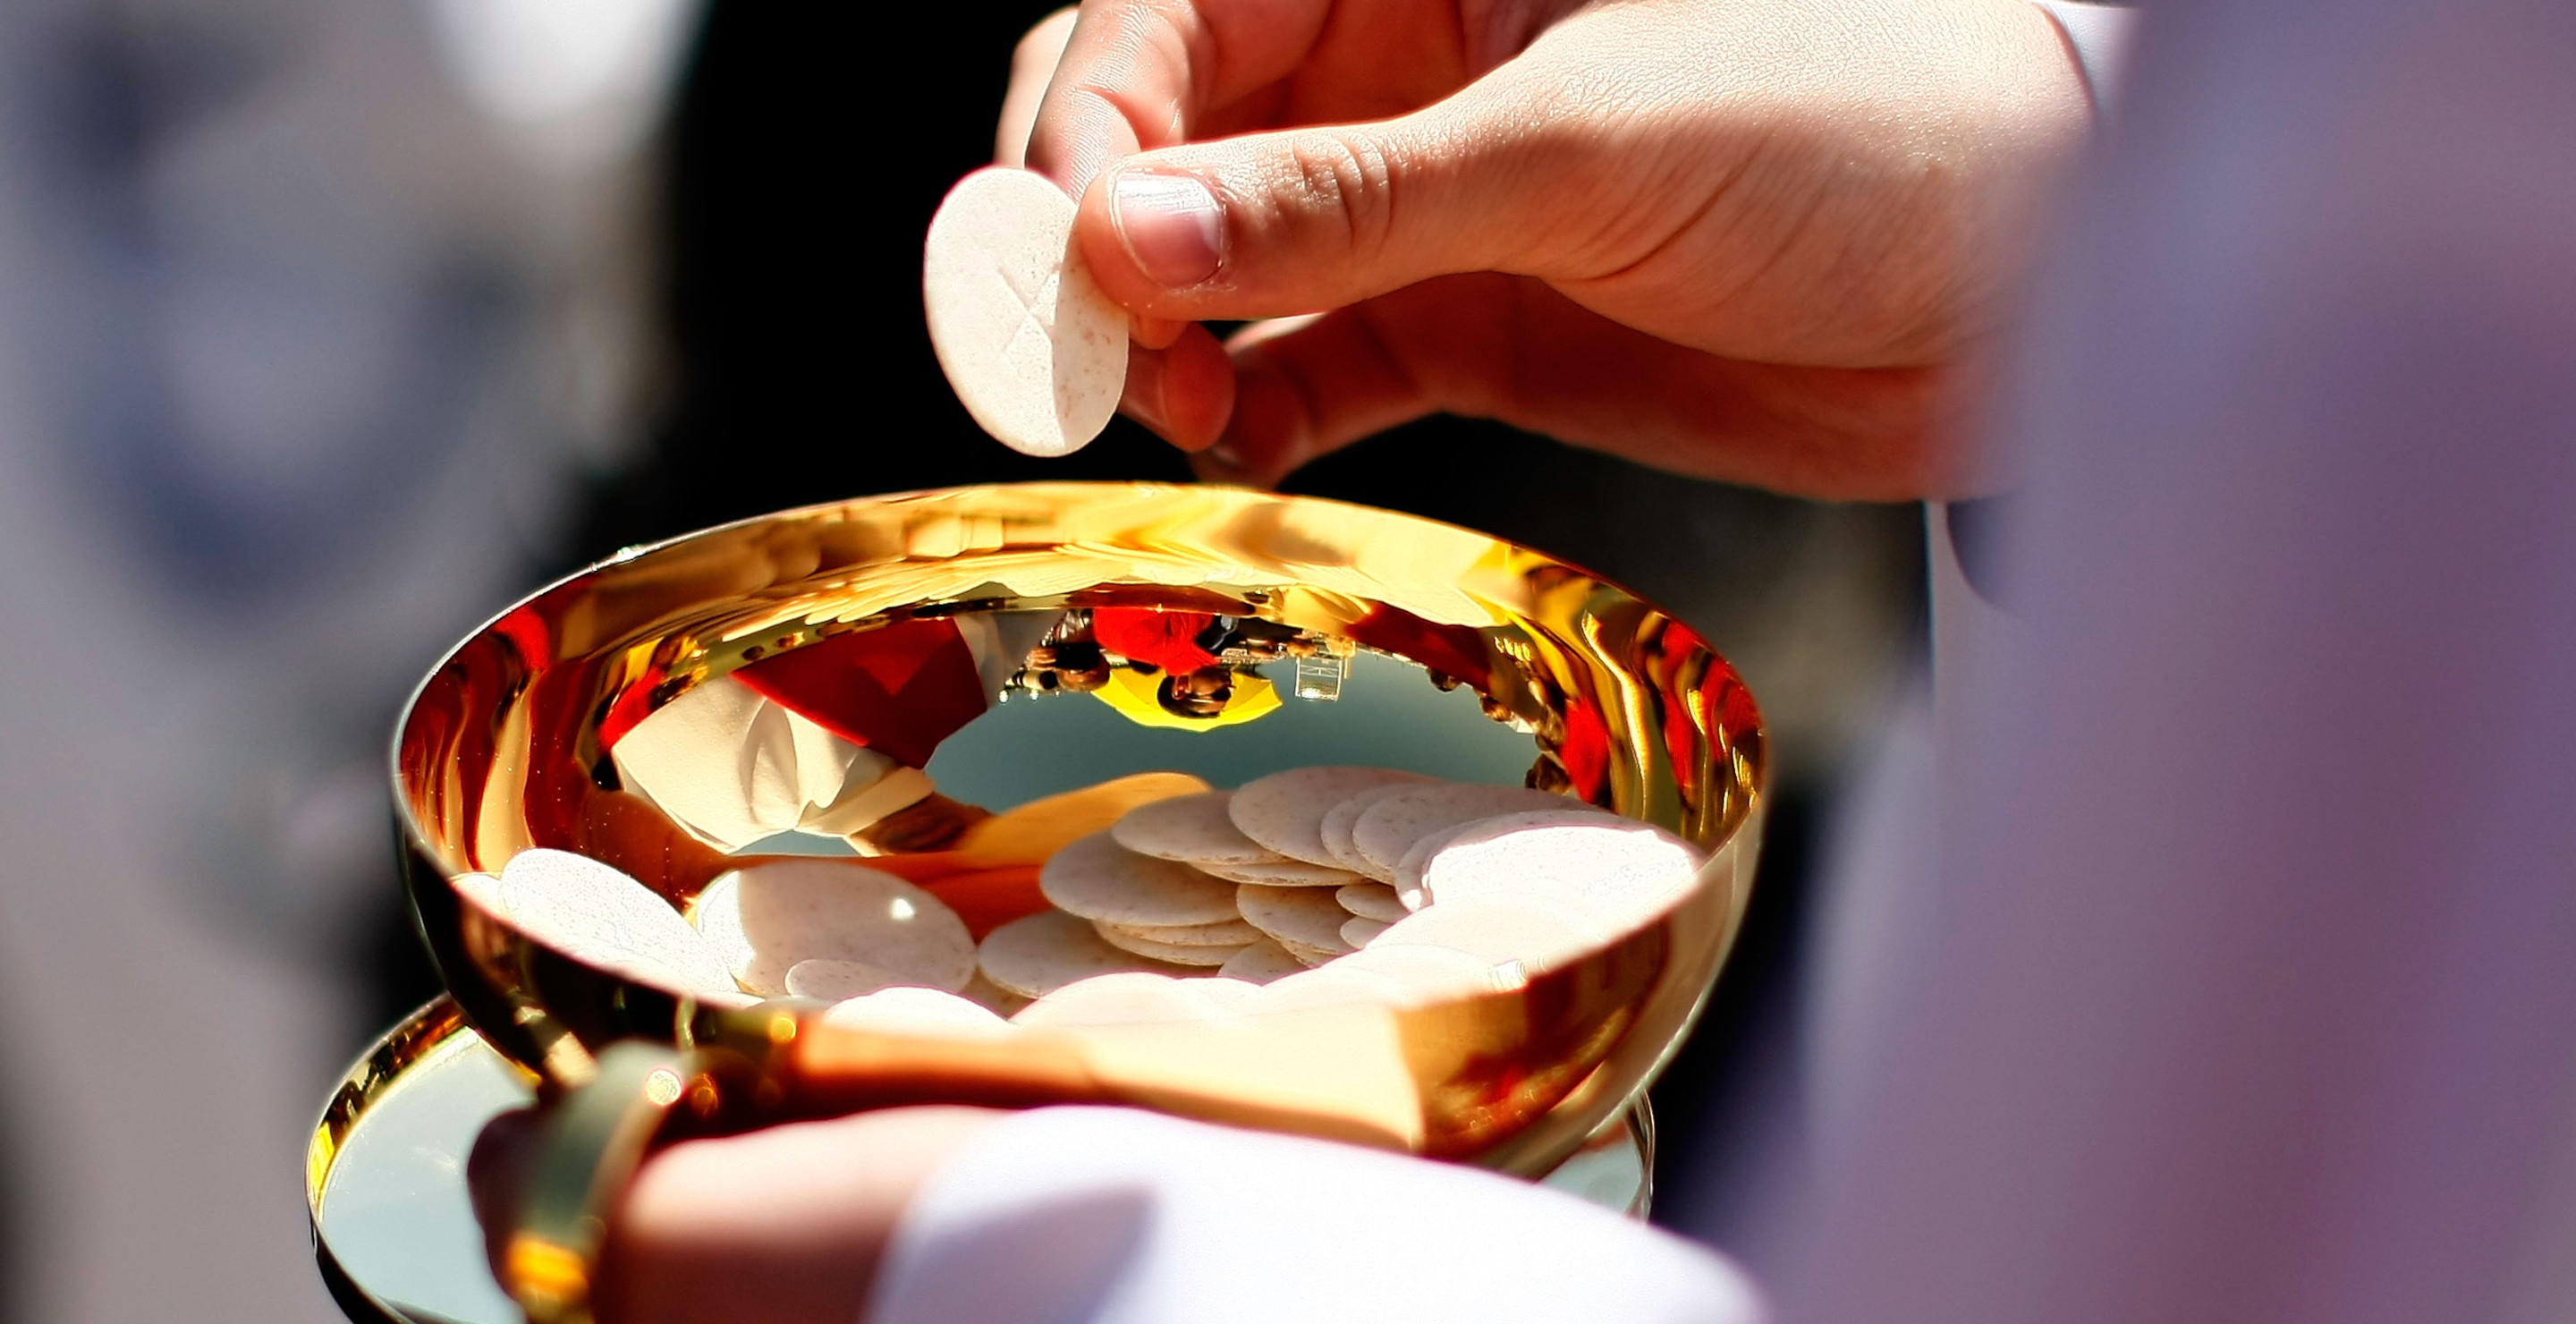 Florida Priest Bites Woman After Getting In Scuffle During Communion